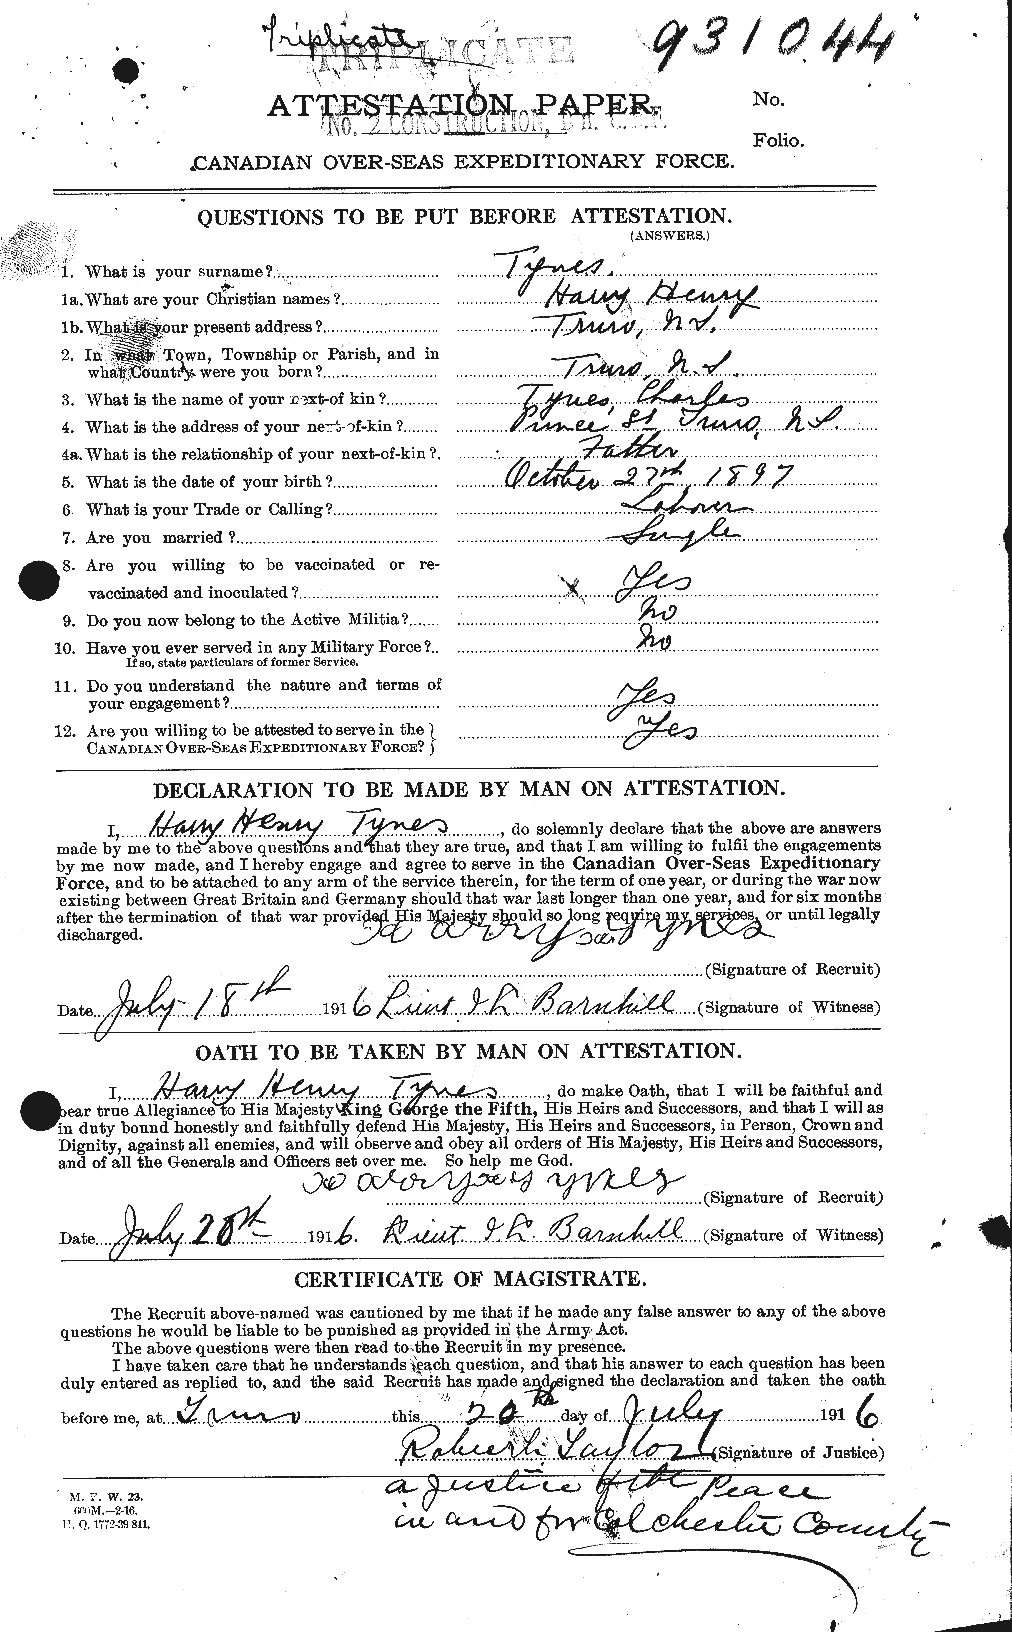 Personnel Records of the First World War - CEF 644539a